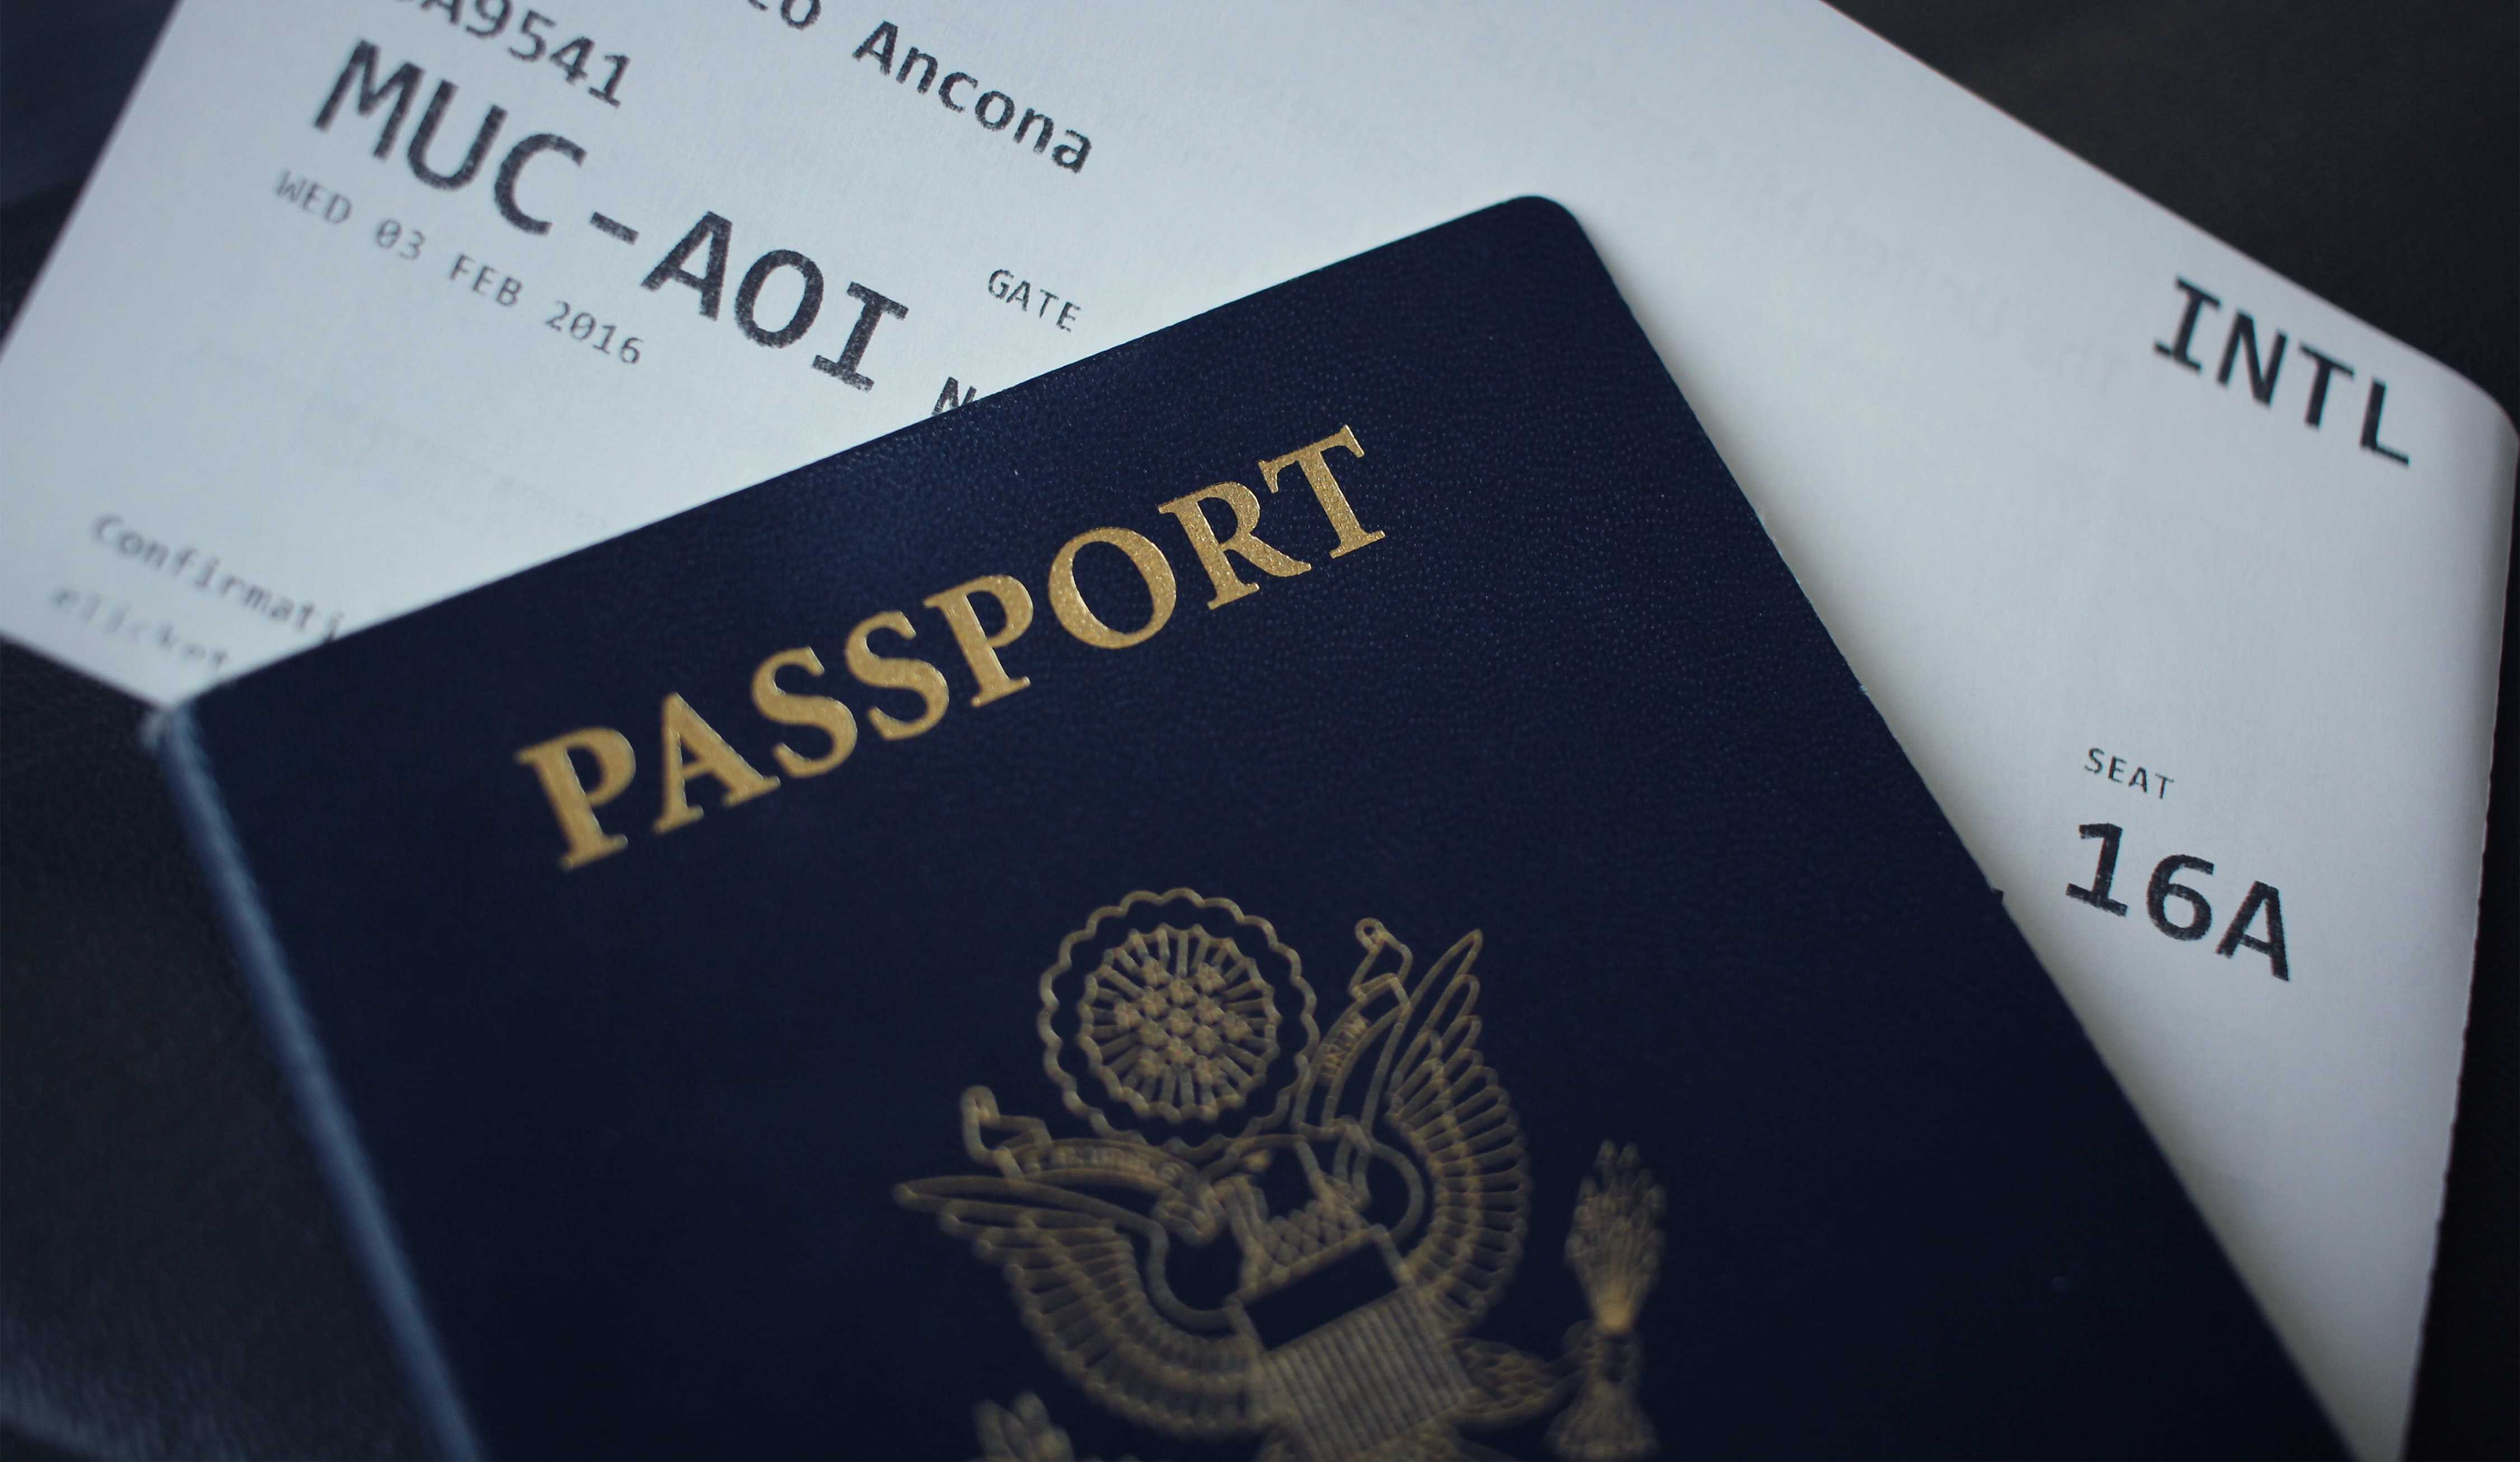 out-Pasaporte1.jpg